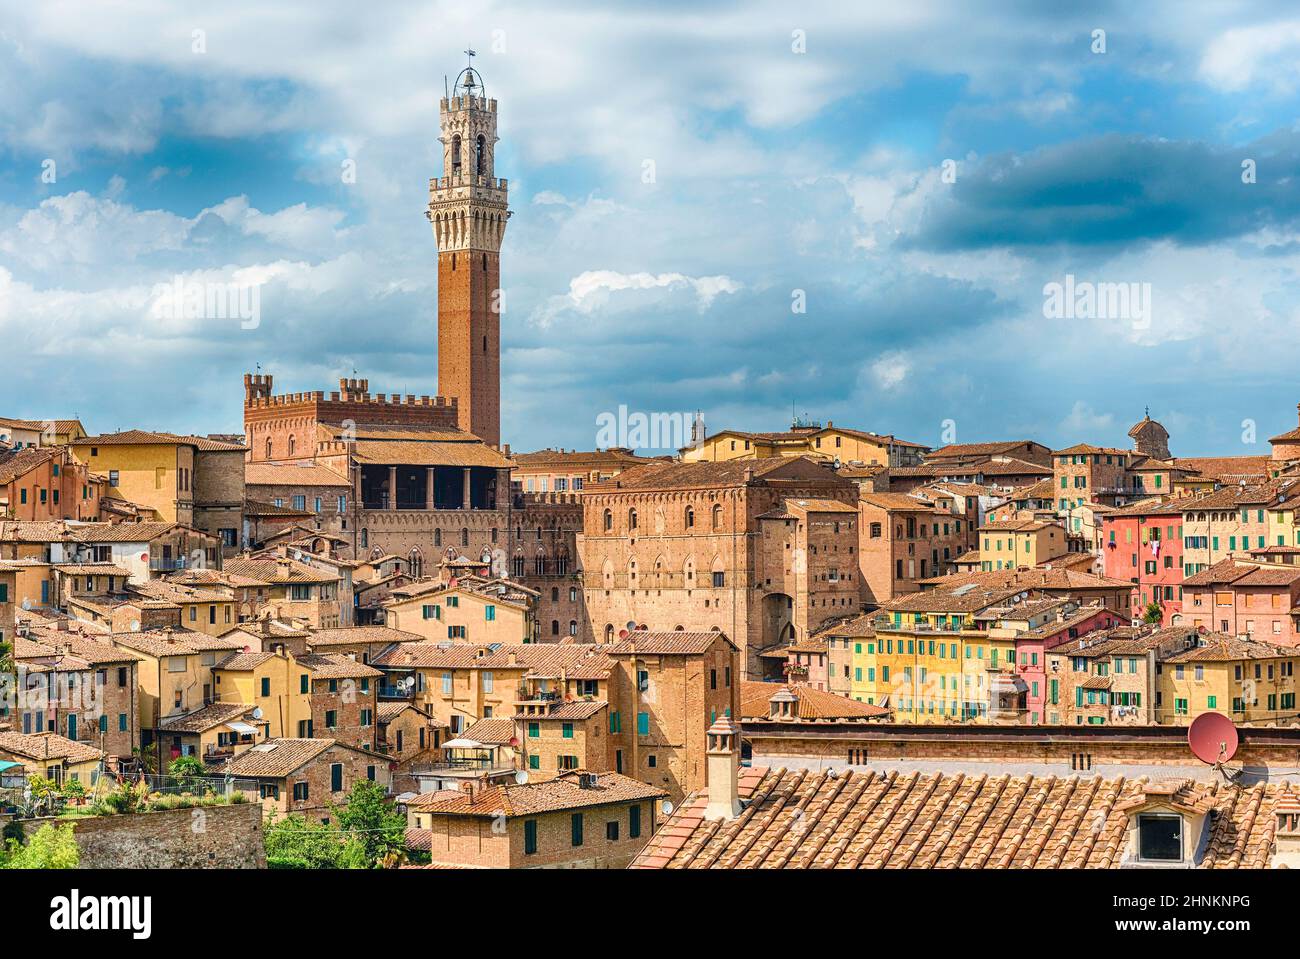 View over the picturesque city centre of Siena, Italy Stock Photo